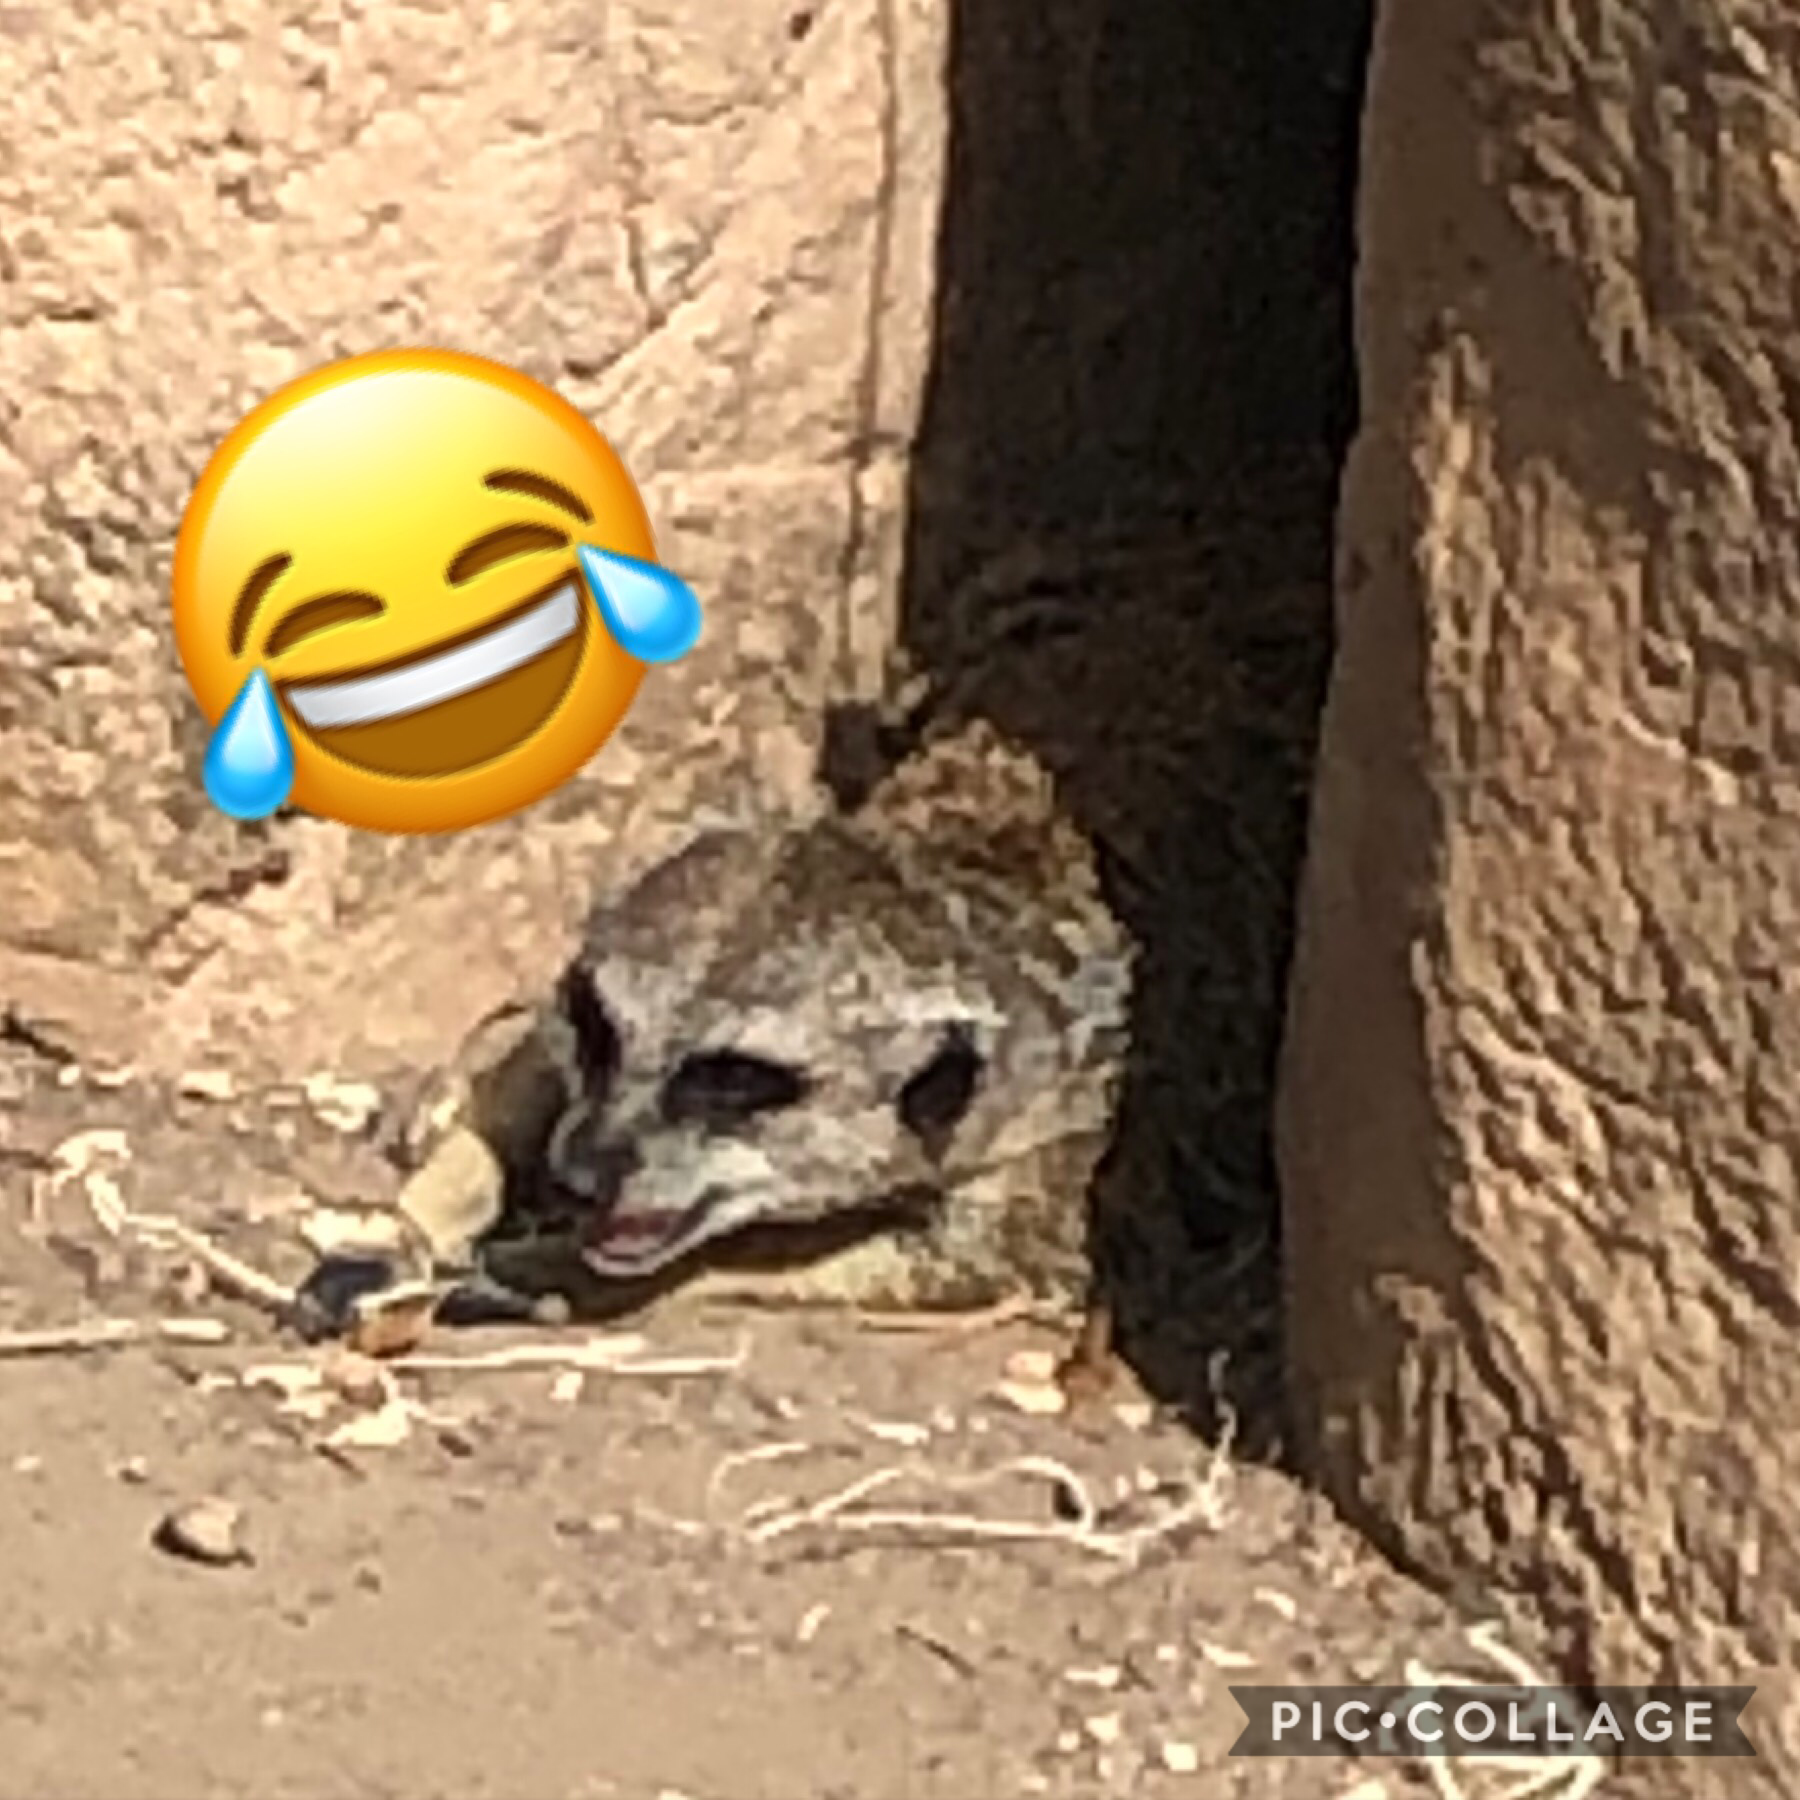 😂Tap😂
A meerkat we saw at the zoo yesterday 